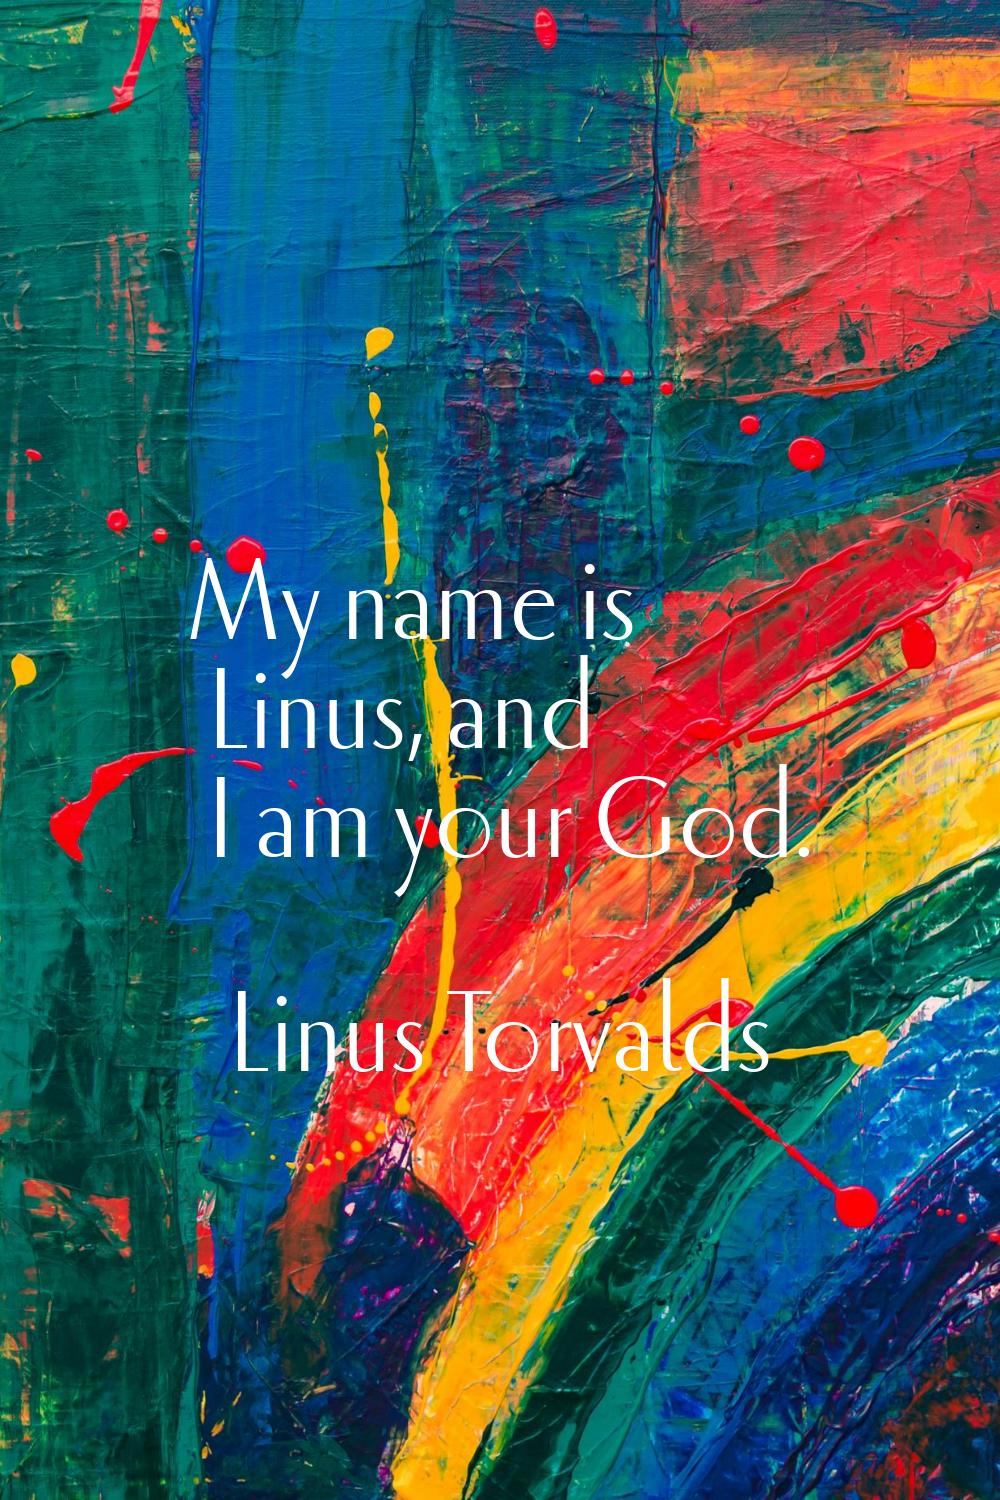 My name is Linus, and I am your God.